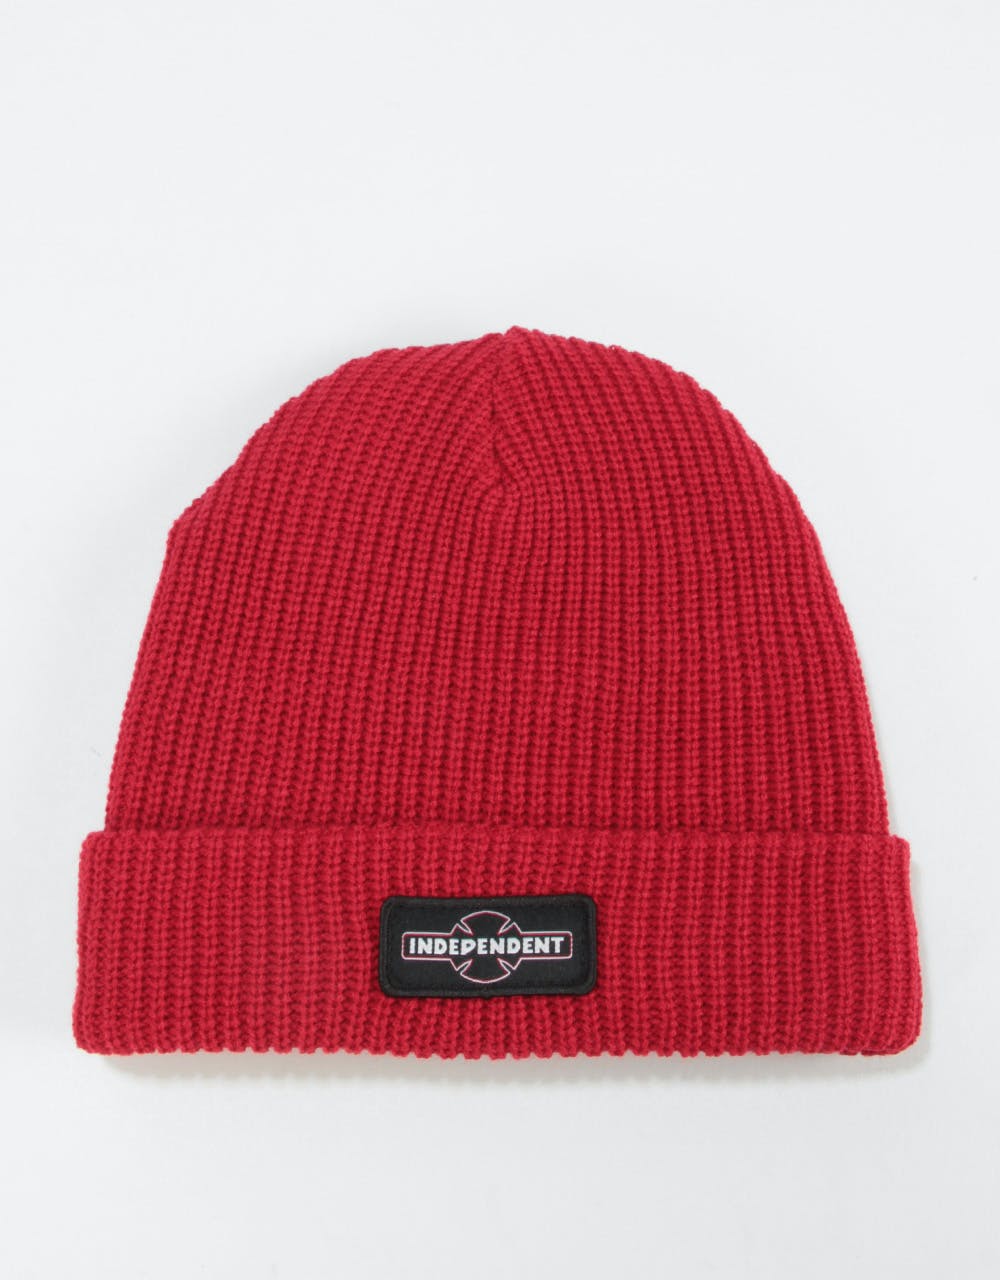 Independent Dual Pinline O.G.B.C Beanie - Red